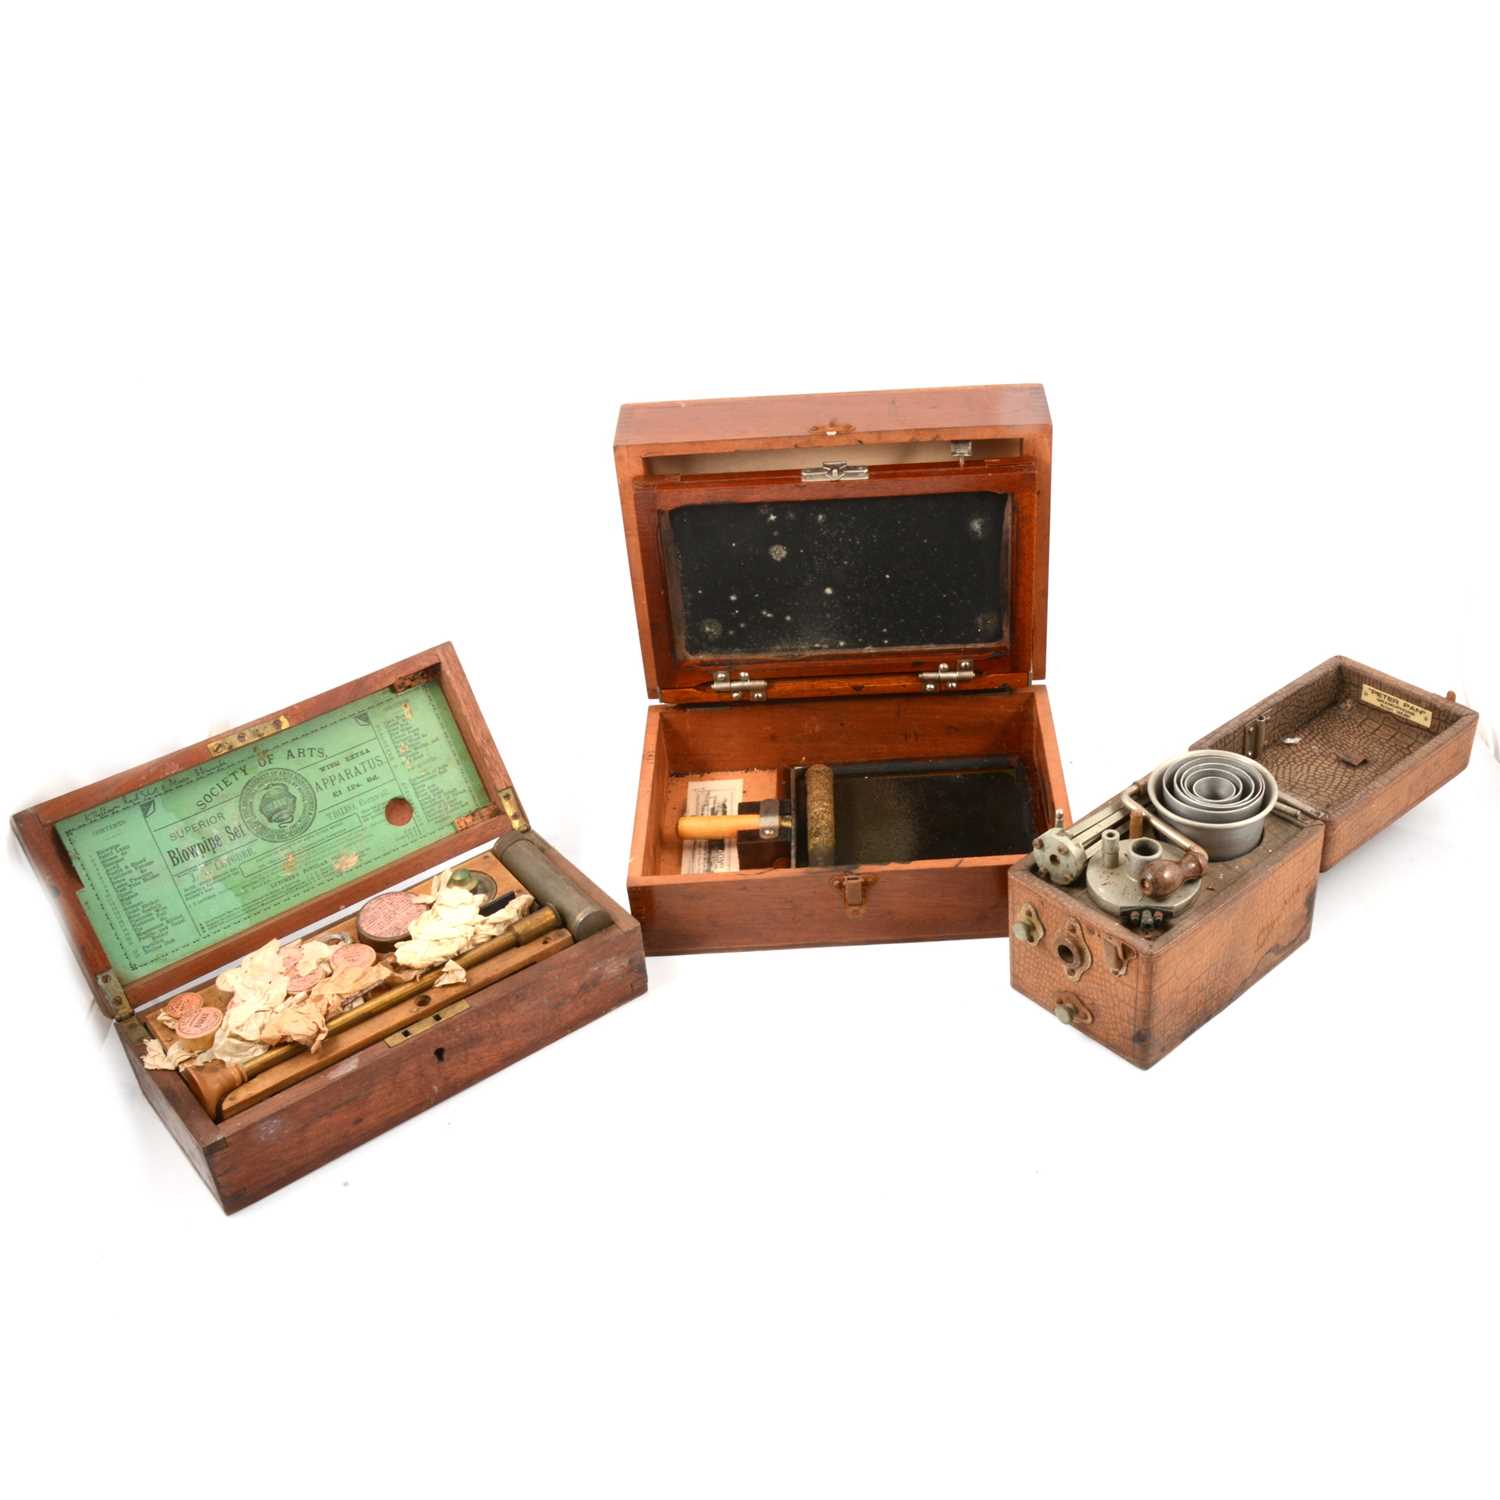 Lot 115 - Leather cased 'Peter Pan' picnic gramophone, a cased Blowpipe Set, and a portable printing set